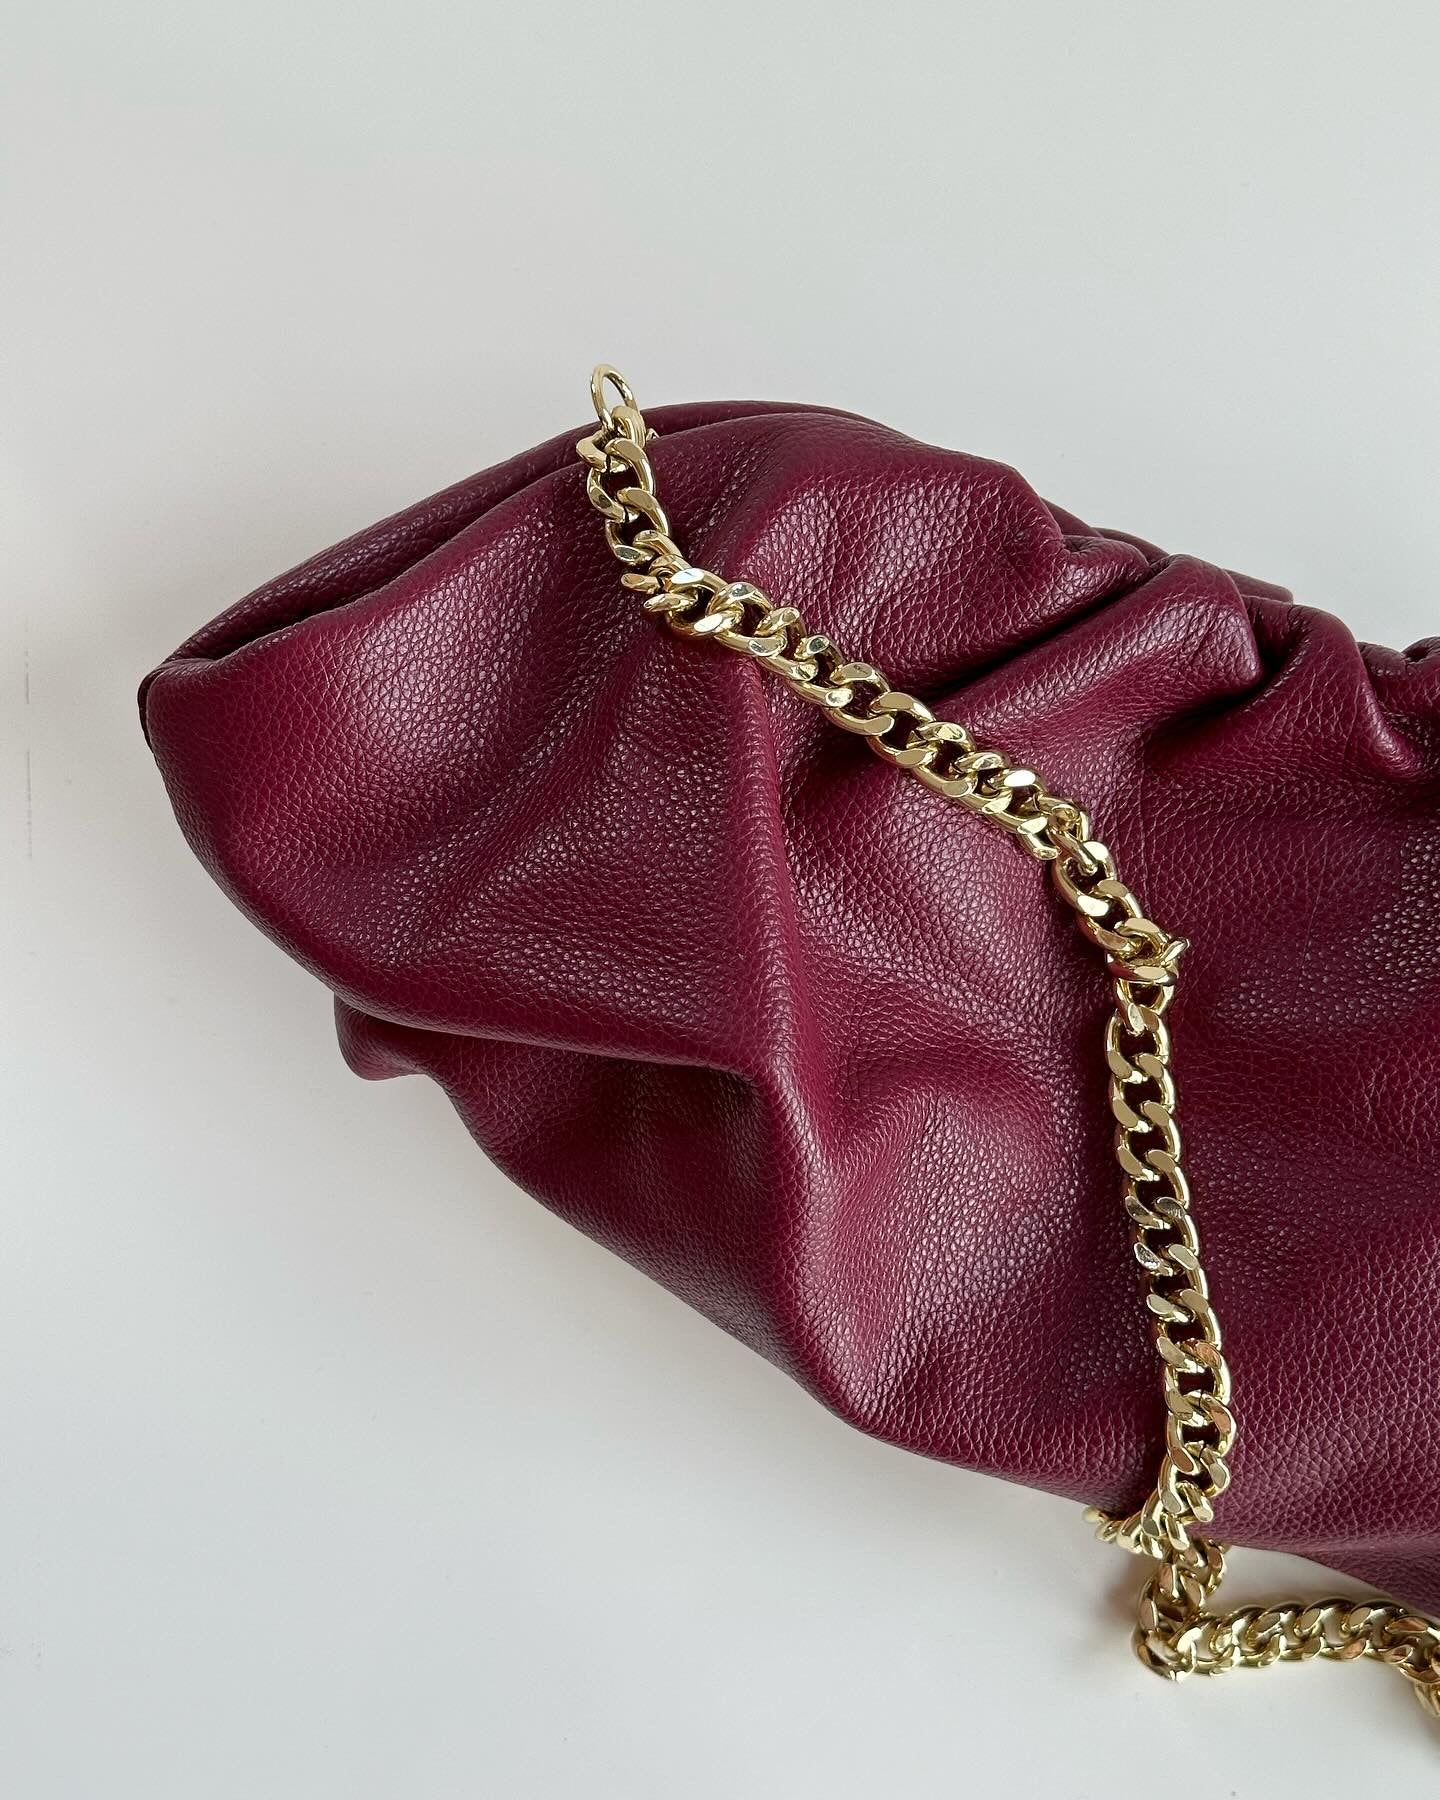 Amazing leather clutch bag in a burgundy color